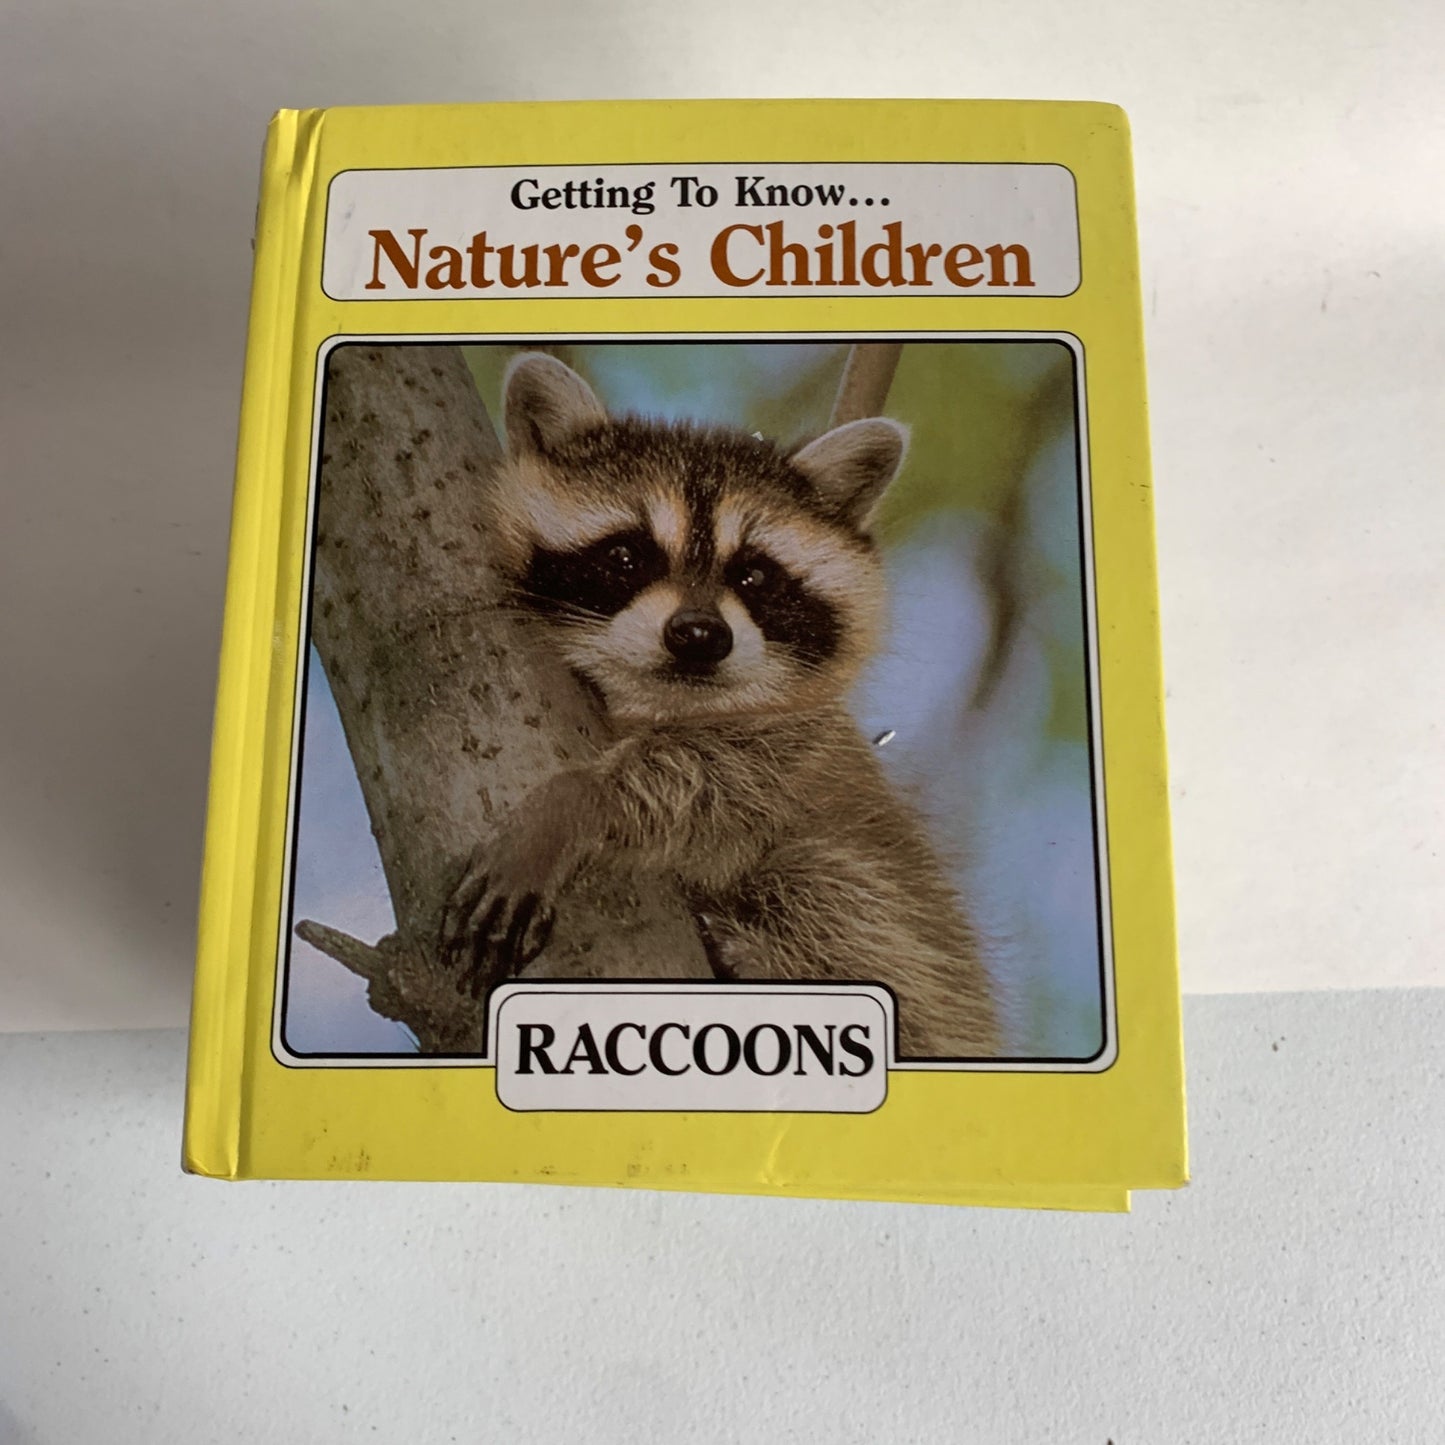 1985 Getting to Know Nature's Children Books Lot of 14